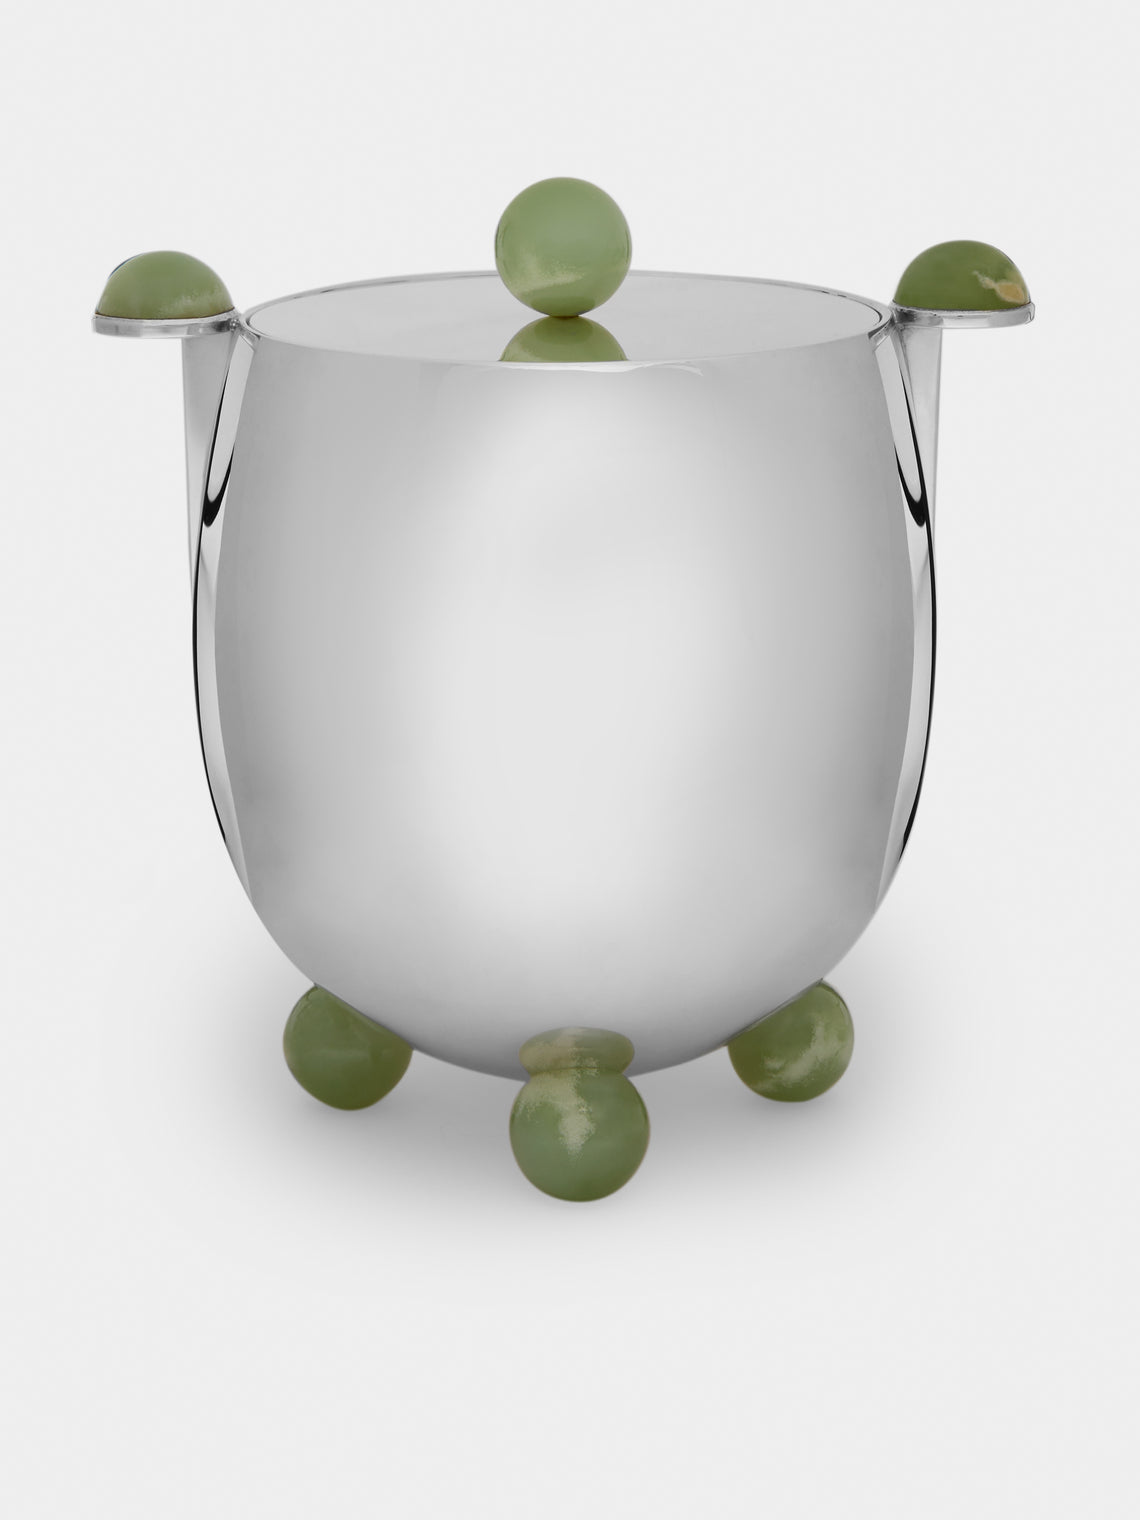 Wiener Silber Manufactur - Sterling Silver and Jade Ice Bucket - Silver - ABASK - 